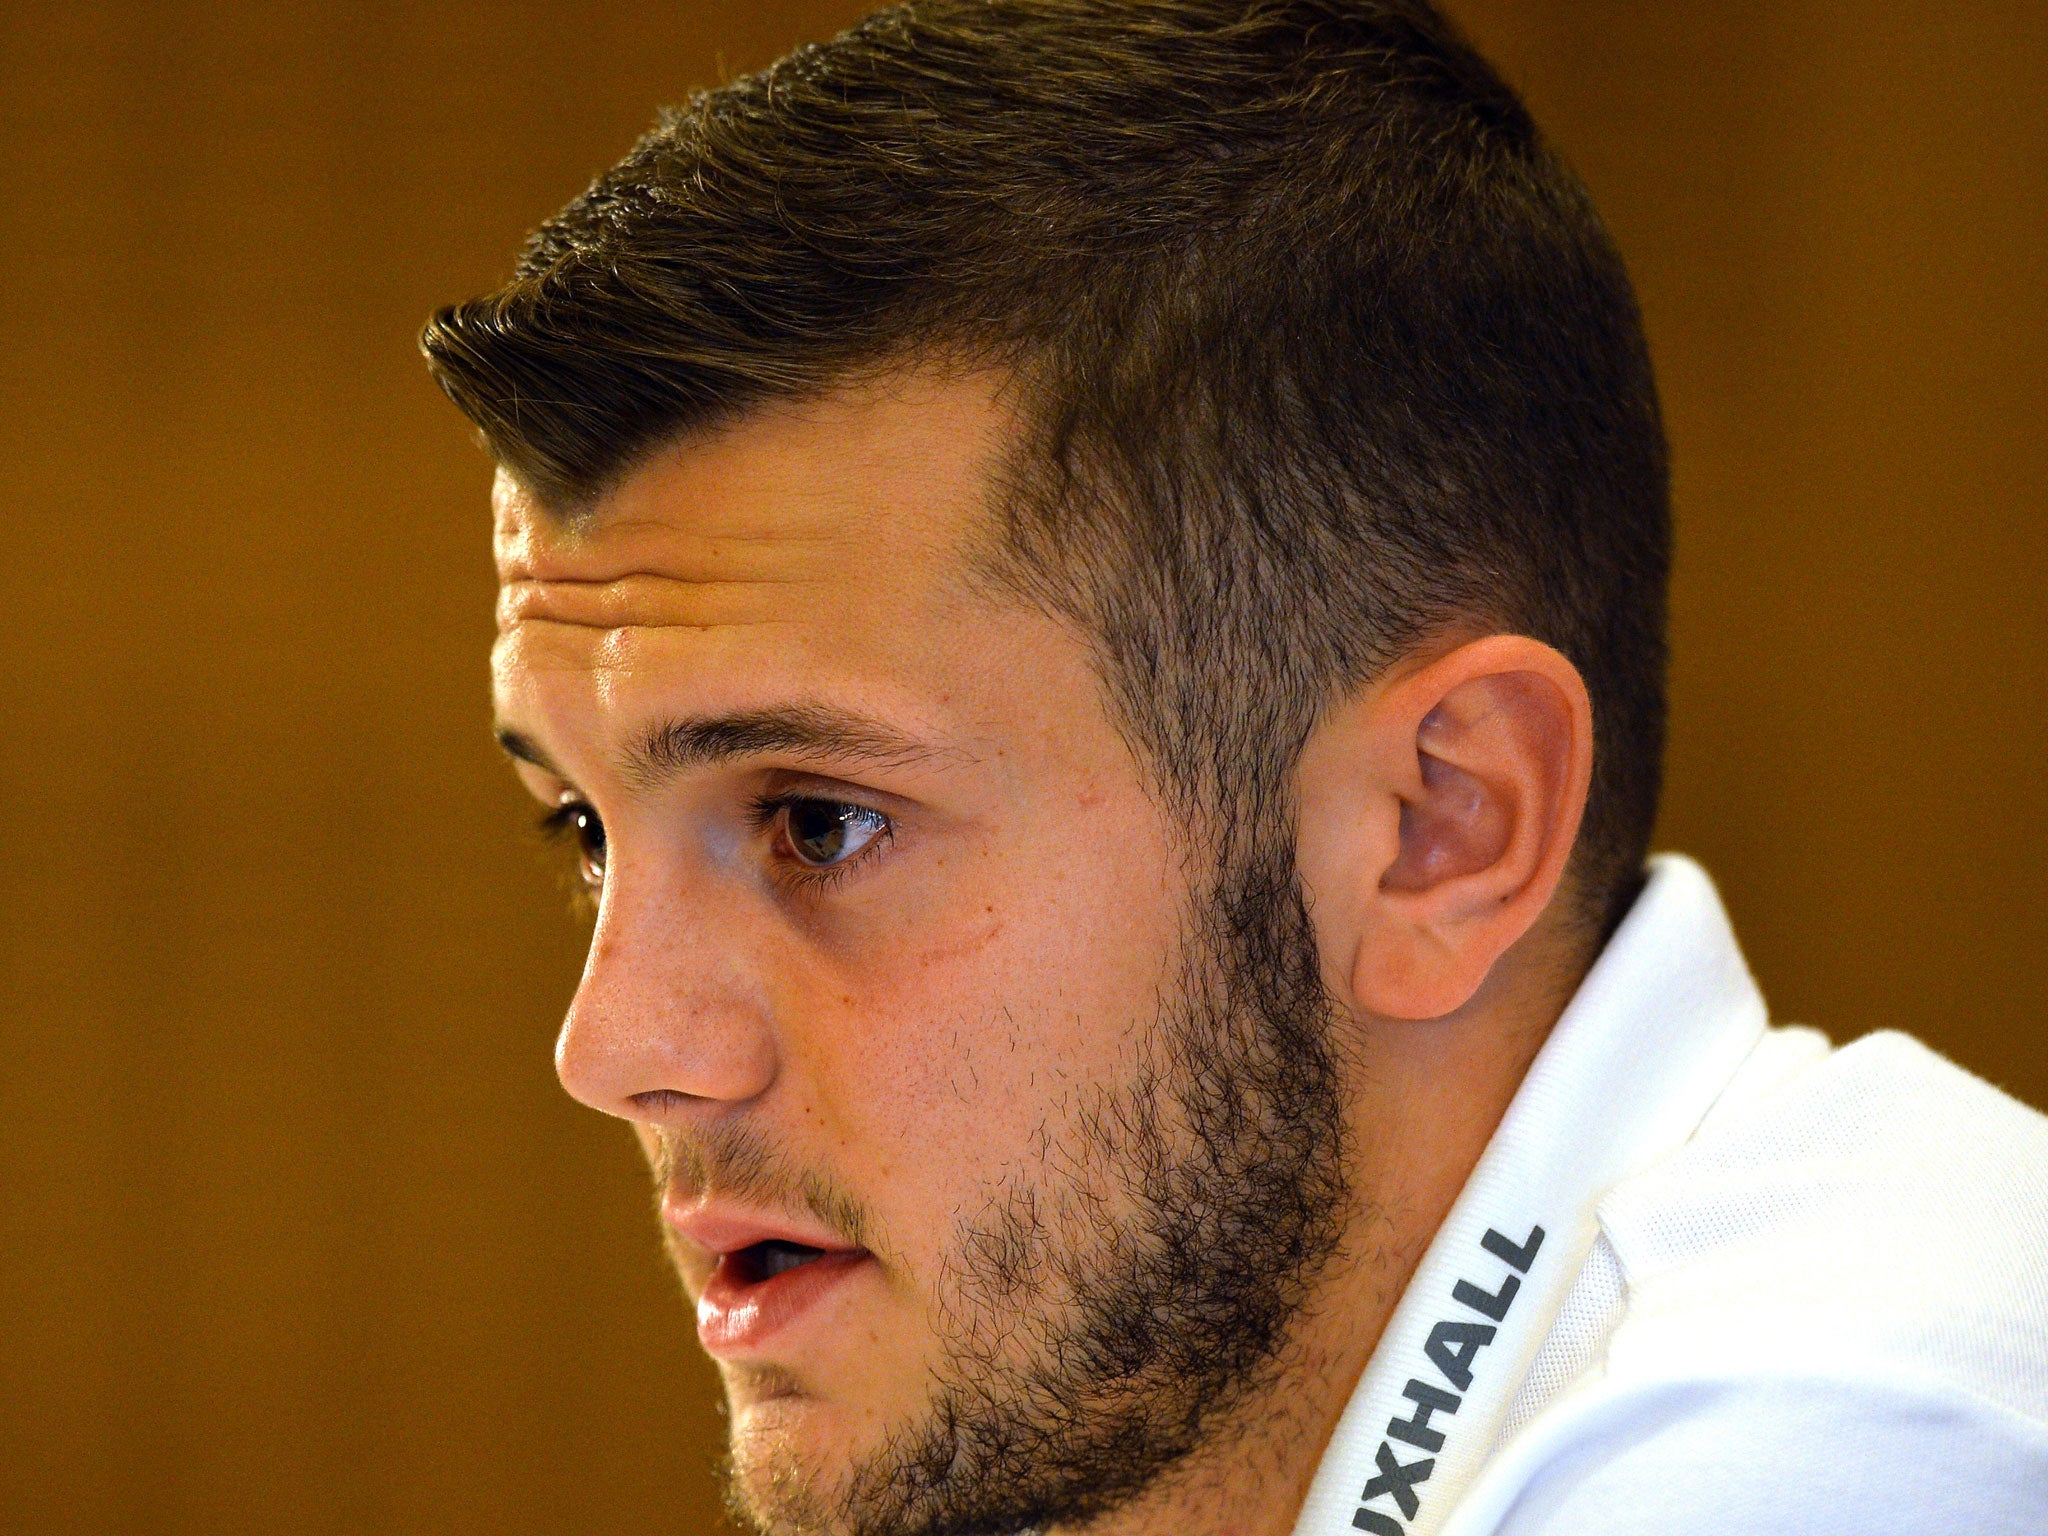 Jack Wilshere has taken to Twitter to defend his comments on whether foreign players should be able to play for England